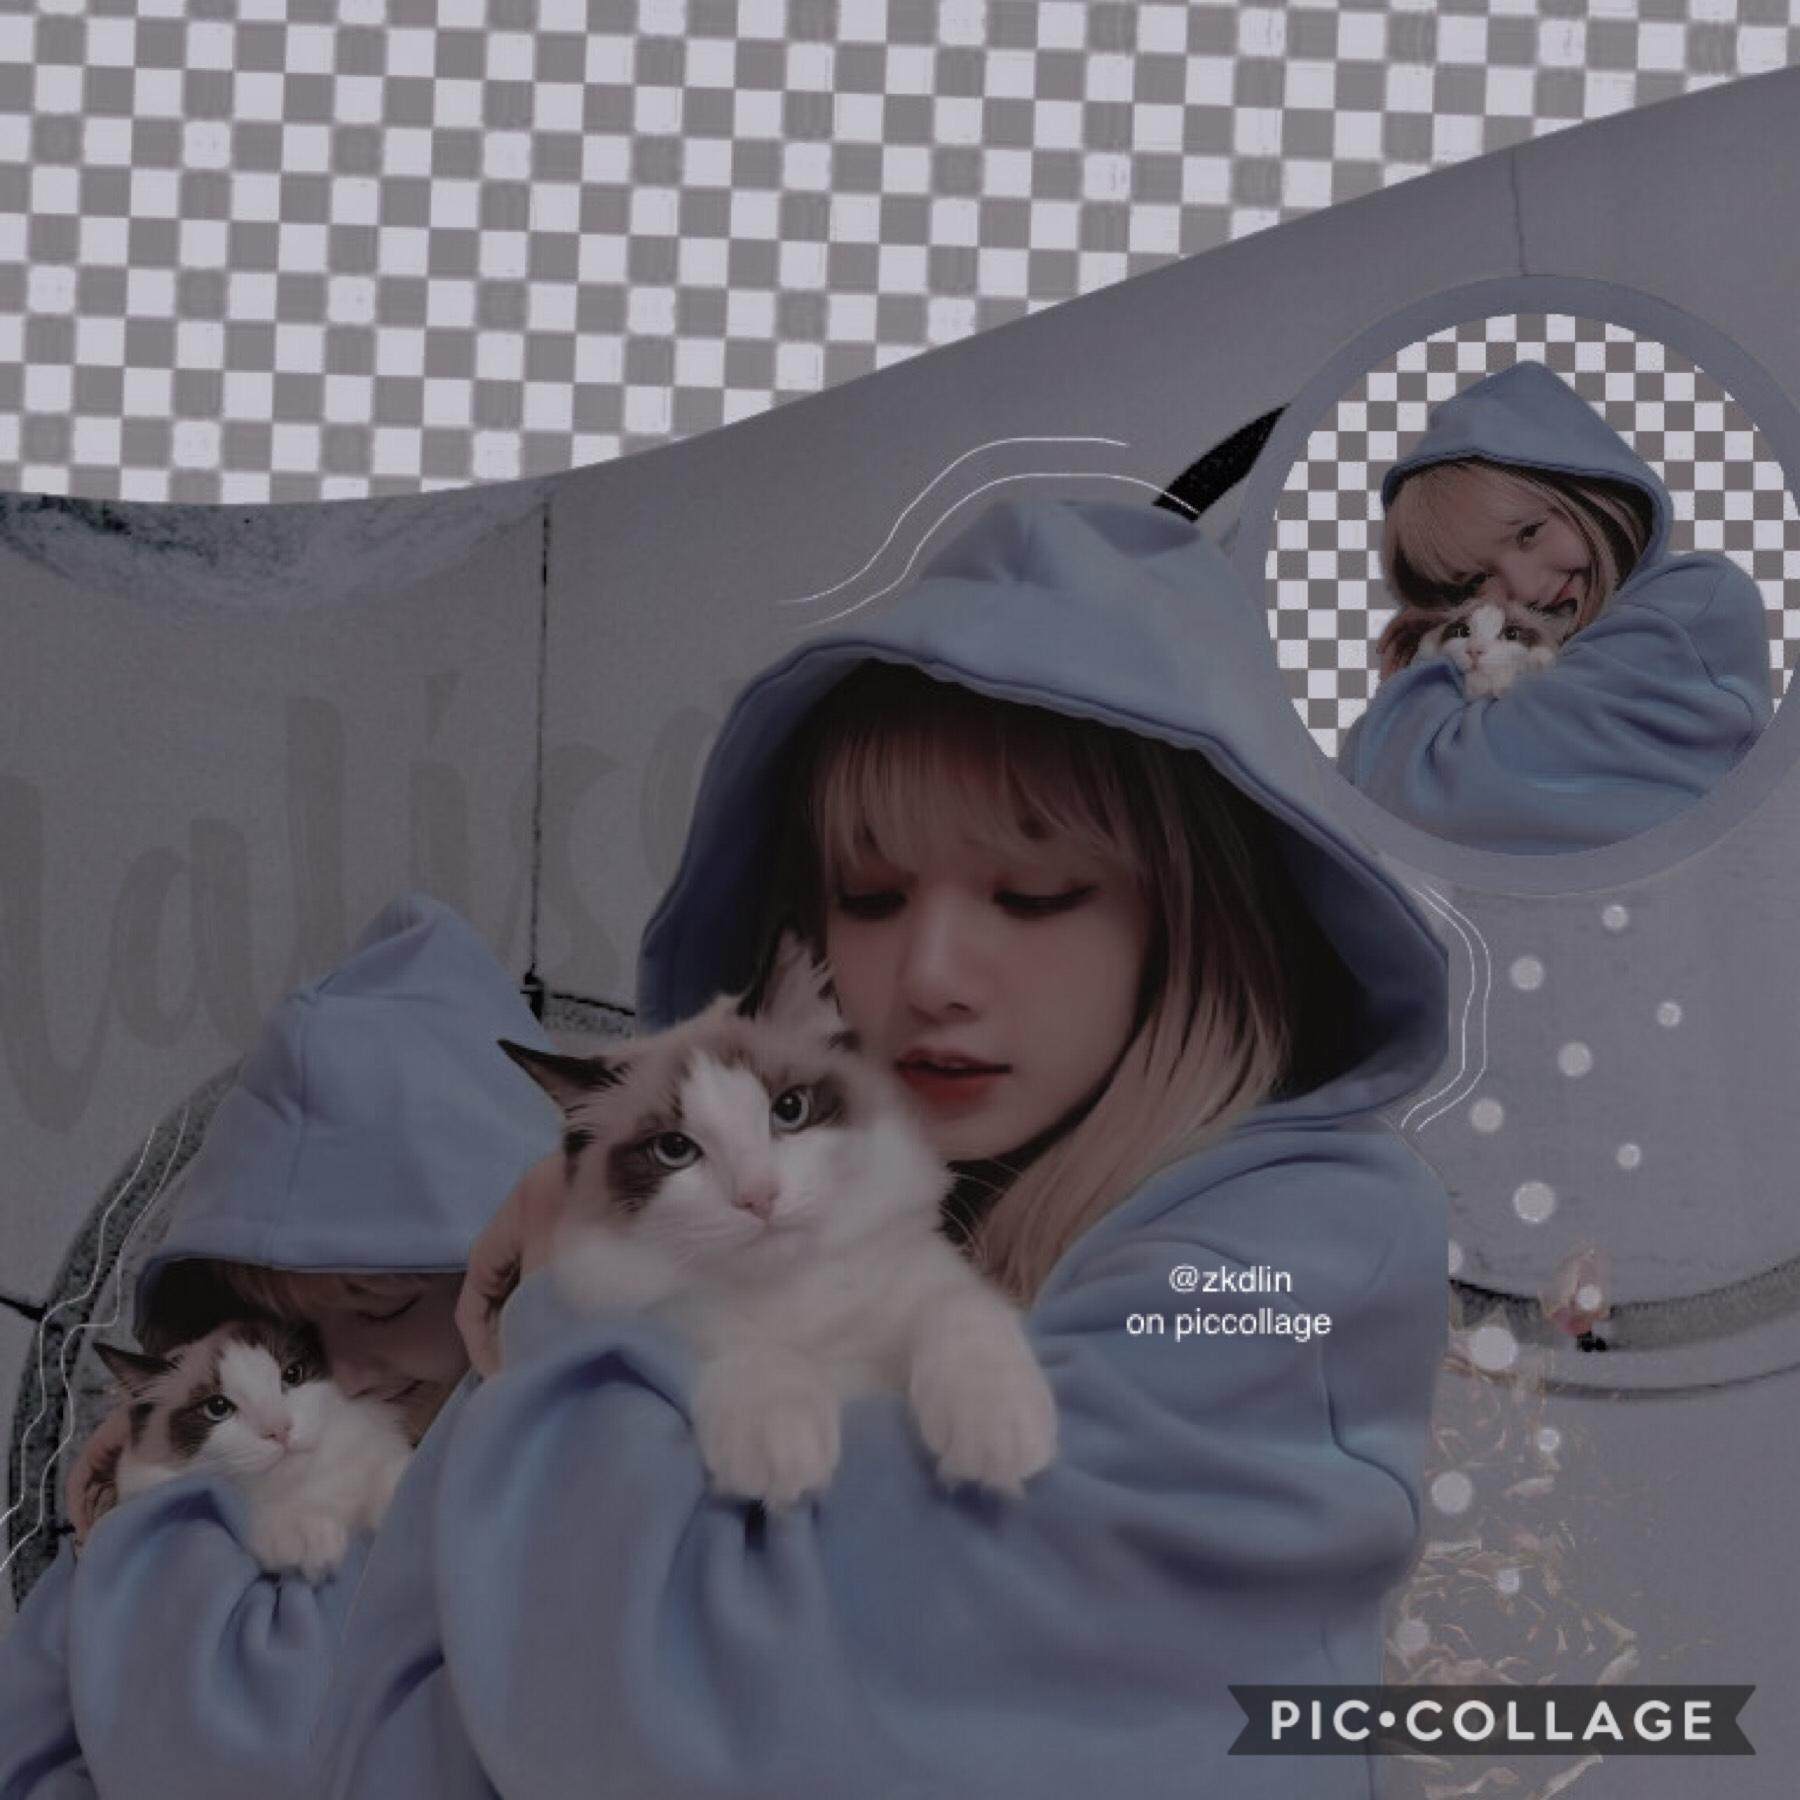 🌊ｌａｌｉｓａ (tap)
—-♡apps used: ibispaint x, picsart, phonto, polarr
—-♡filter by @polarrbts on insta
ok this is trash. all my edits are terrible, but this one...
i almost discarded it, but it took some tiMe to make so...
anyways i changed my username and it’